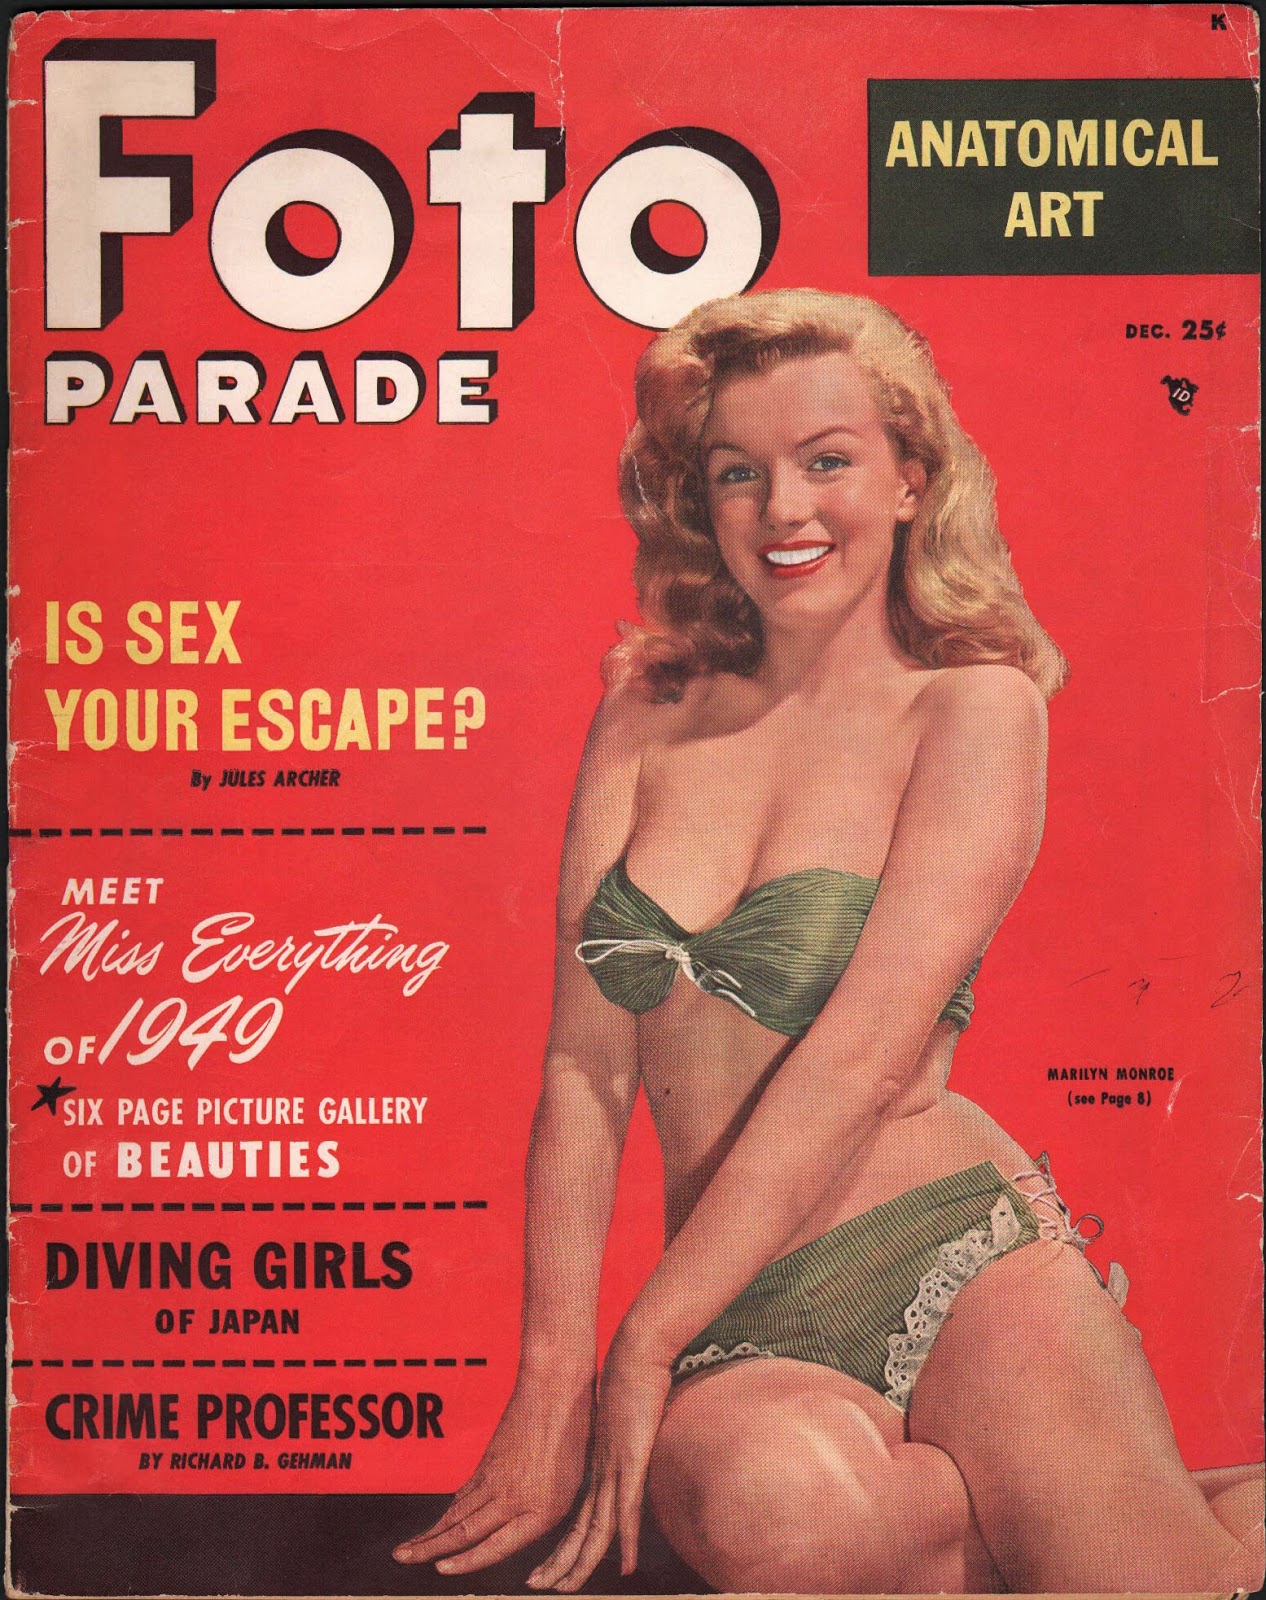 Martin Goodman The Marilyn Monroe Covers Articles And Photo Features